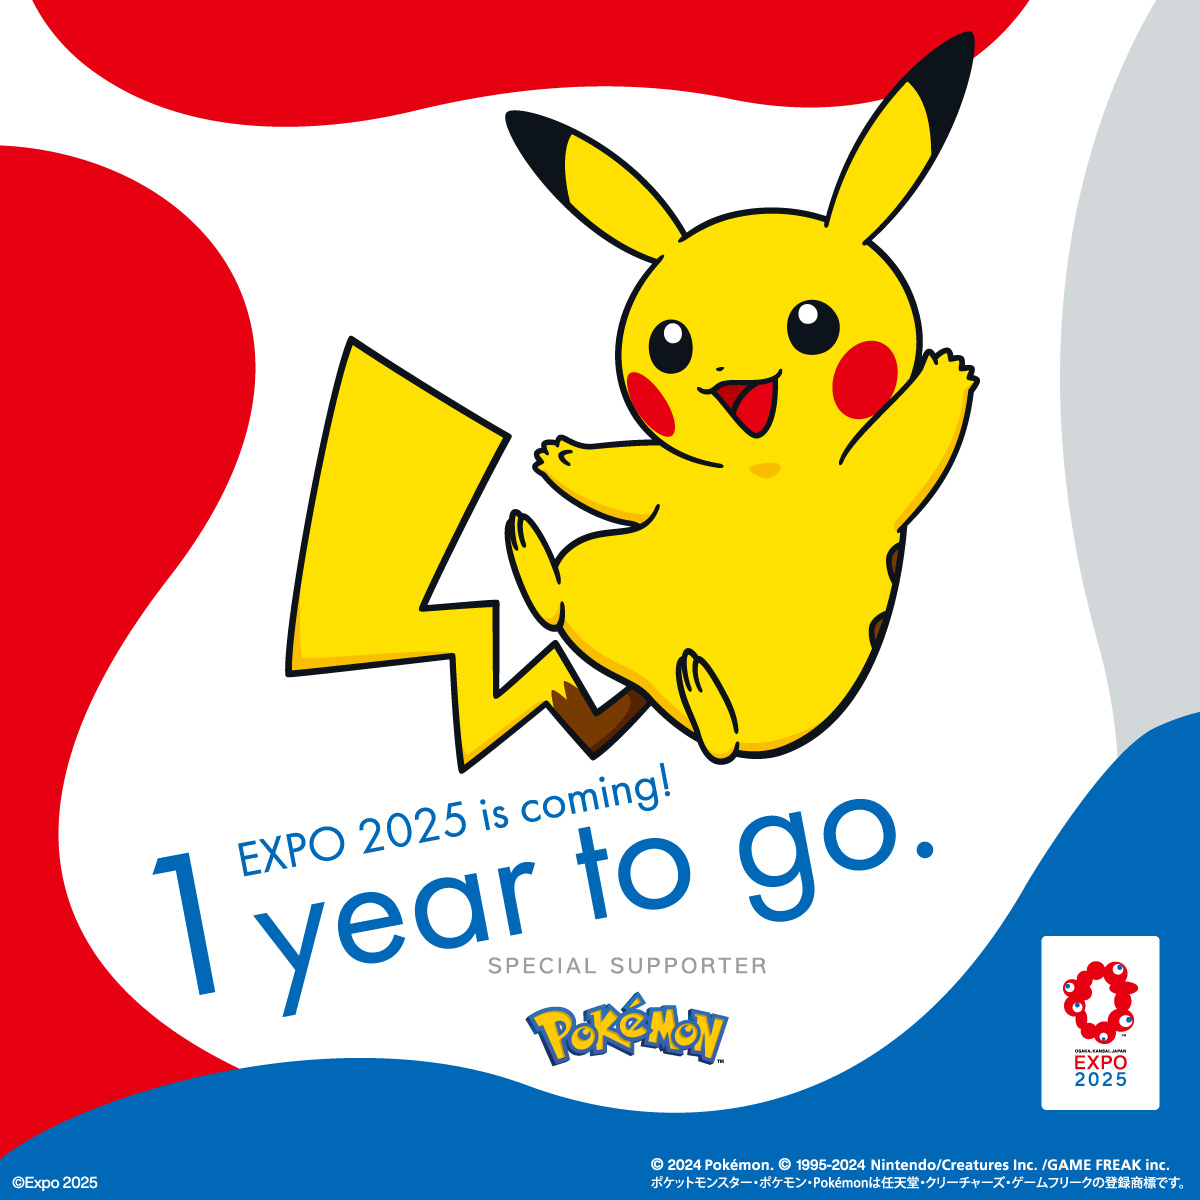 1 Year to Go until EXPO 2025!

There’s less than a year left until EXPO 2025 opens!!

Special Supporter, Pokémon, is super excited for the Expo that’ll finally start next year on Apr. 13th, 2025🌟

#Pokemon #ポケモン #Pikachu
#くるぞ万博 #EXPO2025isComing #EXPO2025 #1YeartoGo